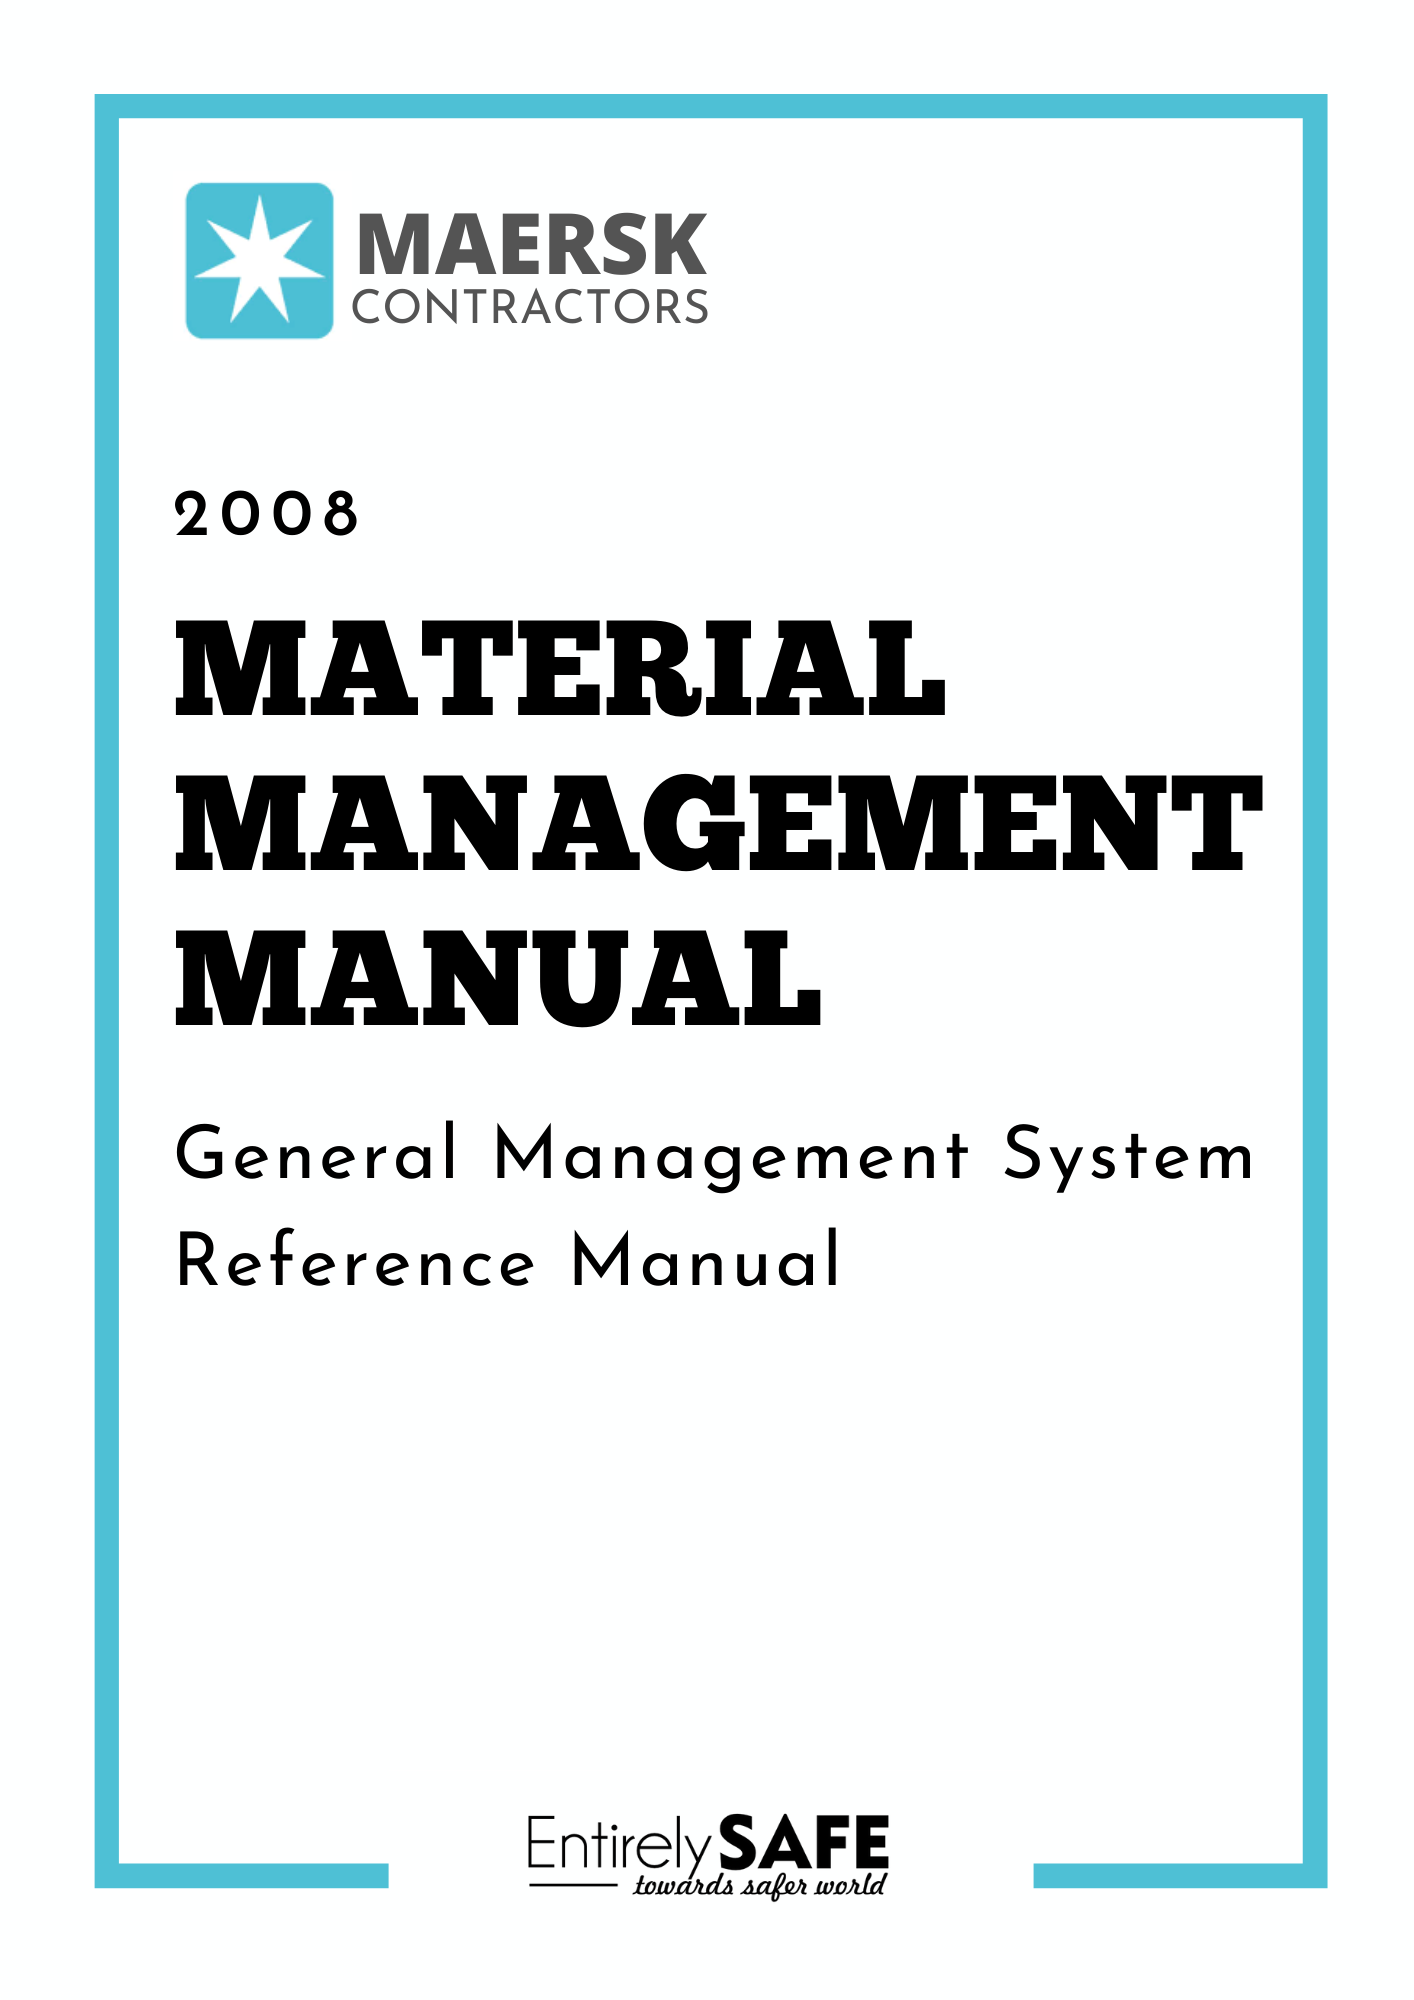 140-Download-FREE-Material-Management-Manual-Maersk-Contractors.png